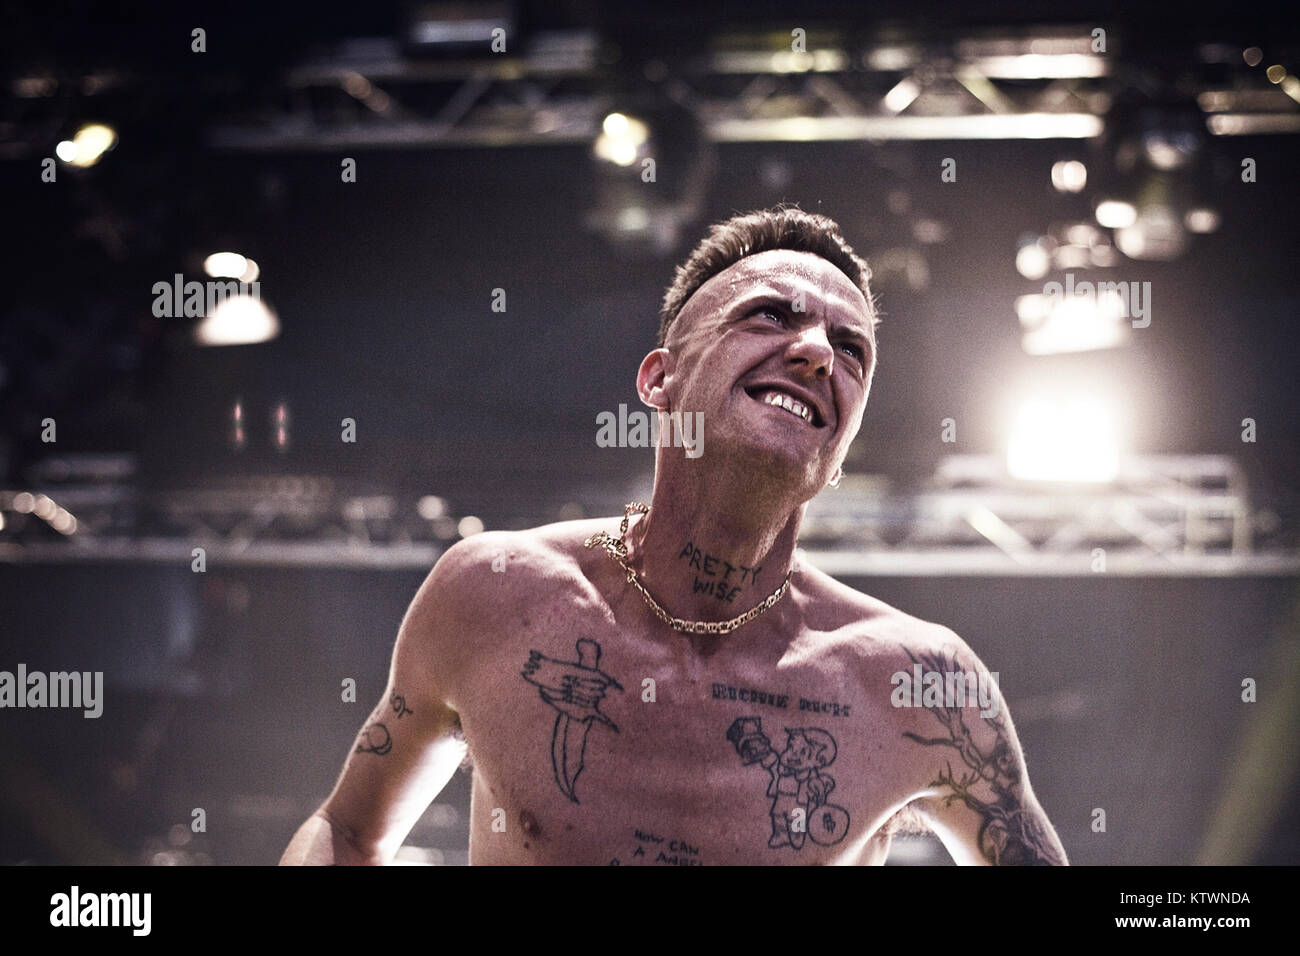 The South African rap duo Die Antwoord performs a live concert at Roskilde Festival 2010. The band consists of the two rave-vocalist Ninja (pictured) and Yo-Landi Vi$$er who perform lyrics in Afrikaans, Xhosa and English. Denmark, 04/07 2010. Stock Photo